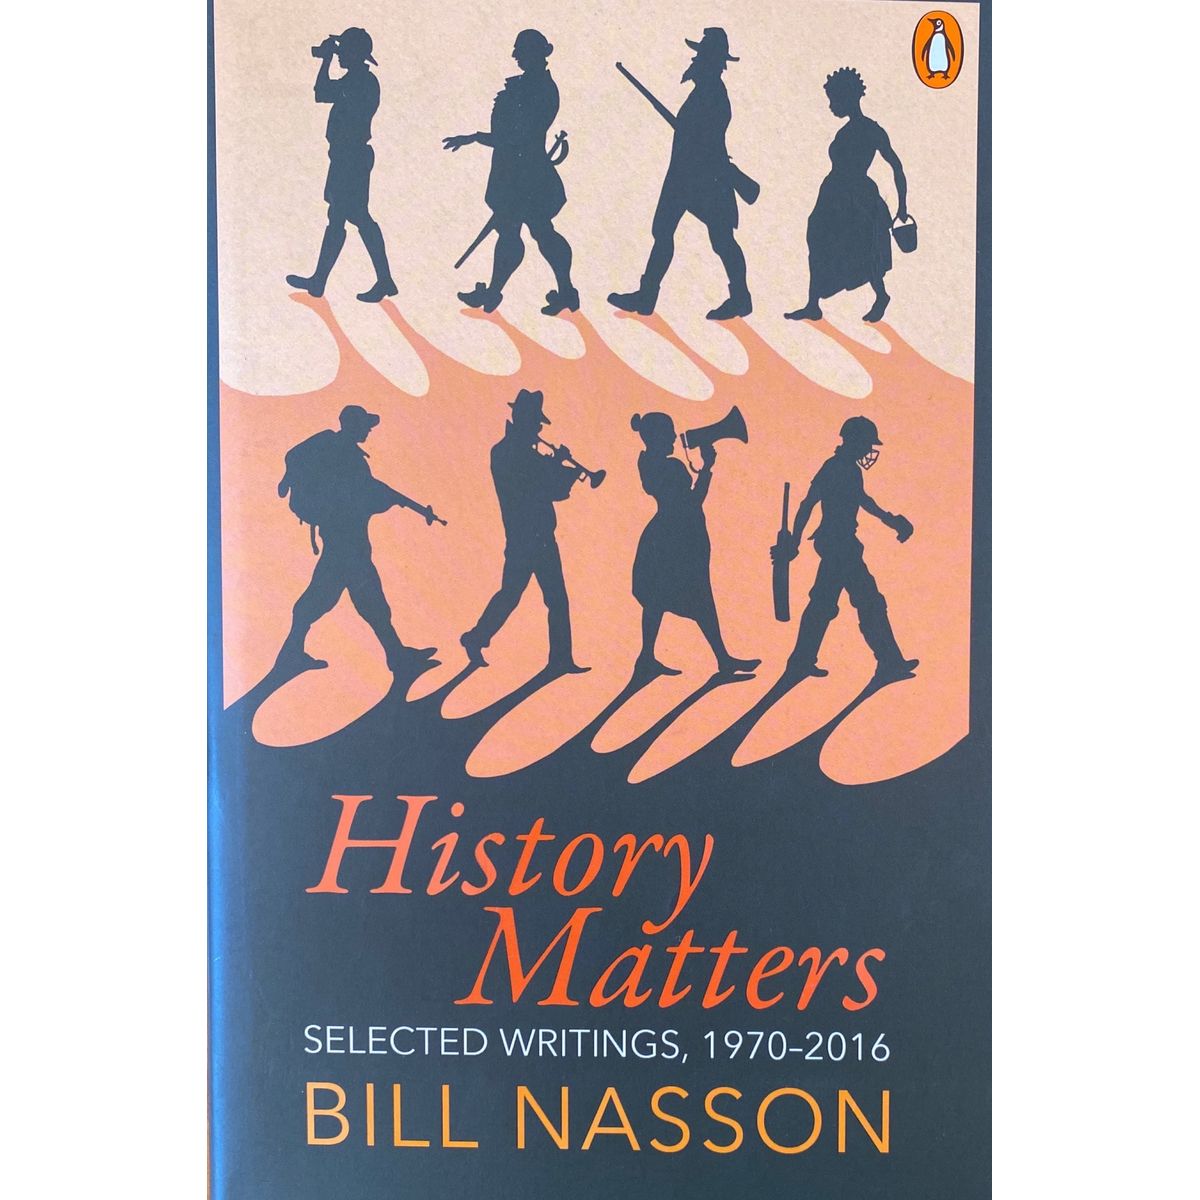 ISBN: 9781776090273 / 1776090276 - History Matters: Selected Writings 1970-2016 by Bill Nasson [2016]